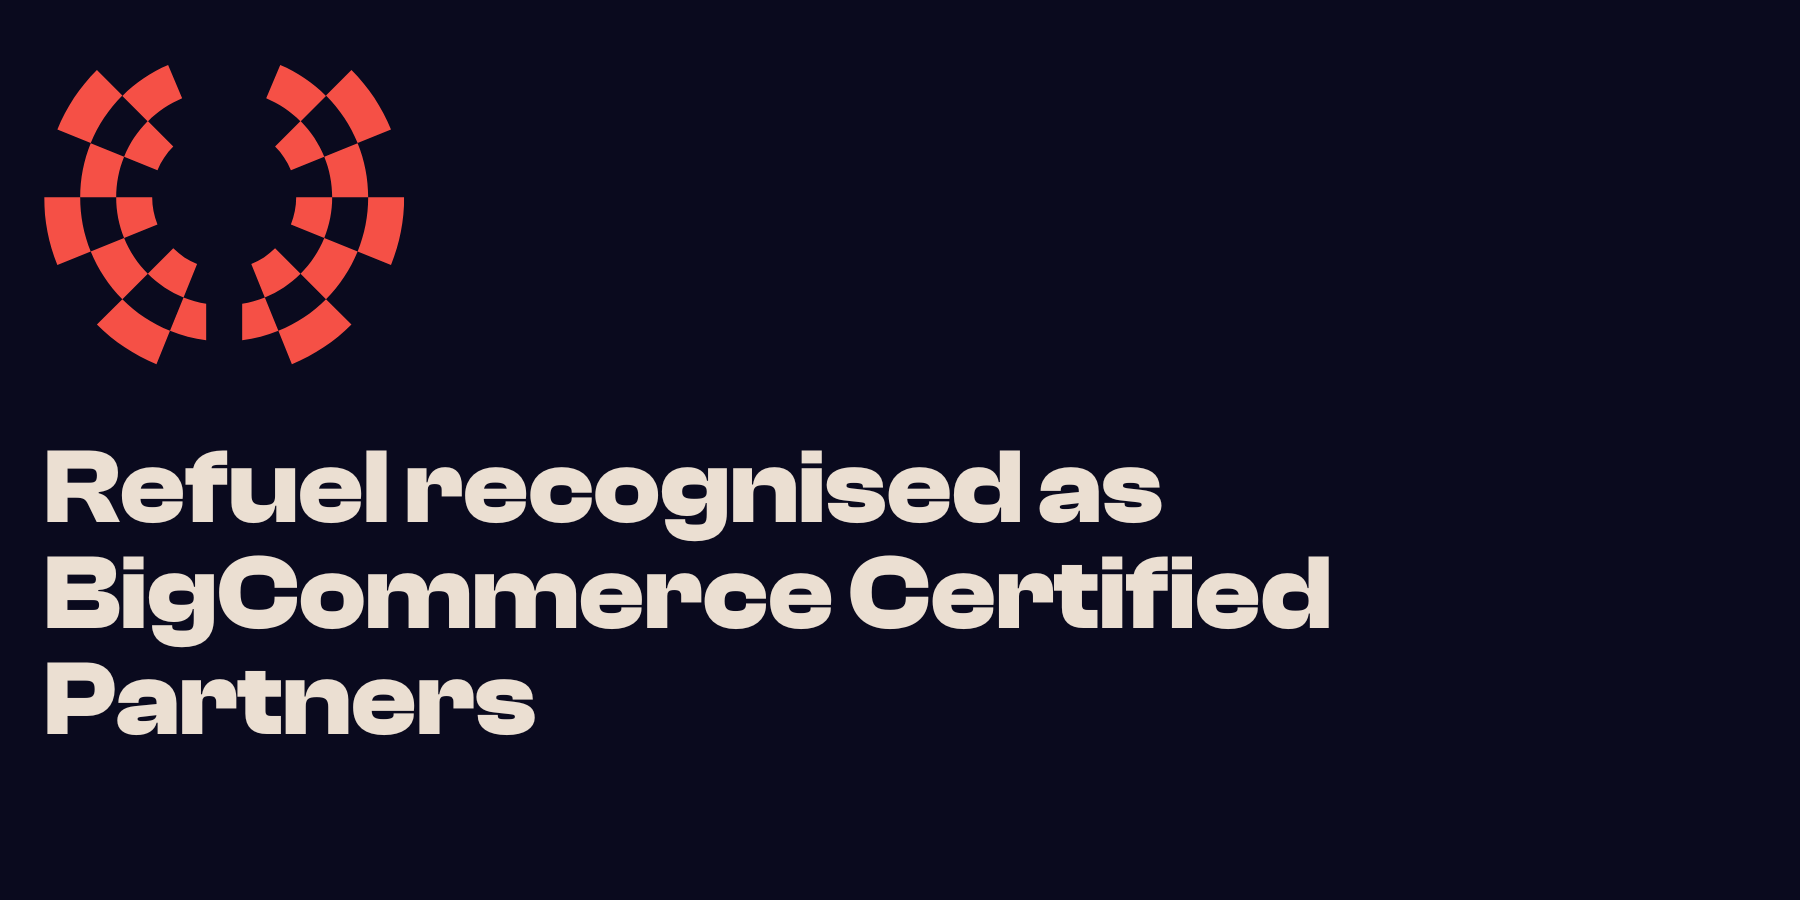 Refuel recognised as BigCommerce Certified Partners